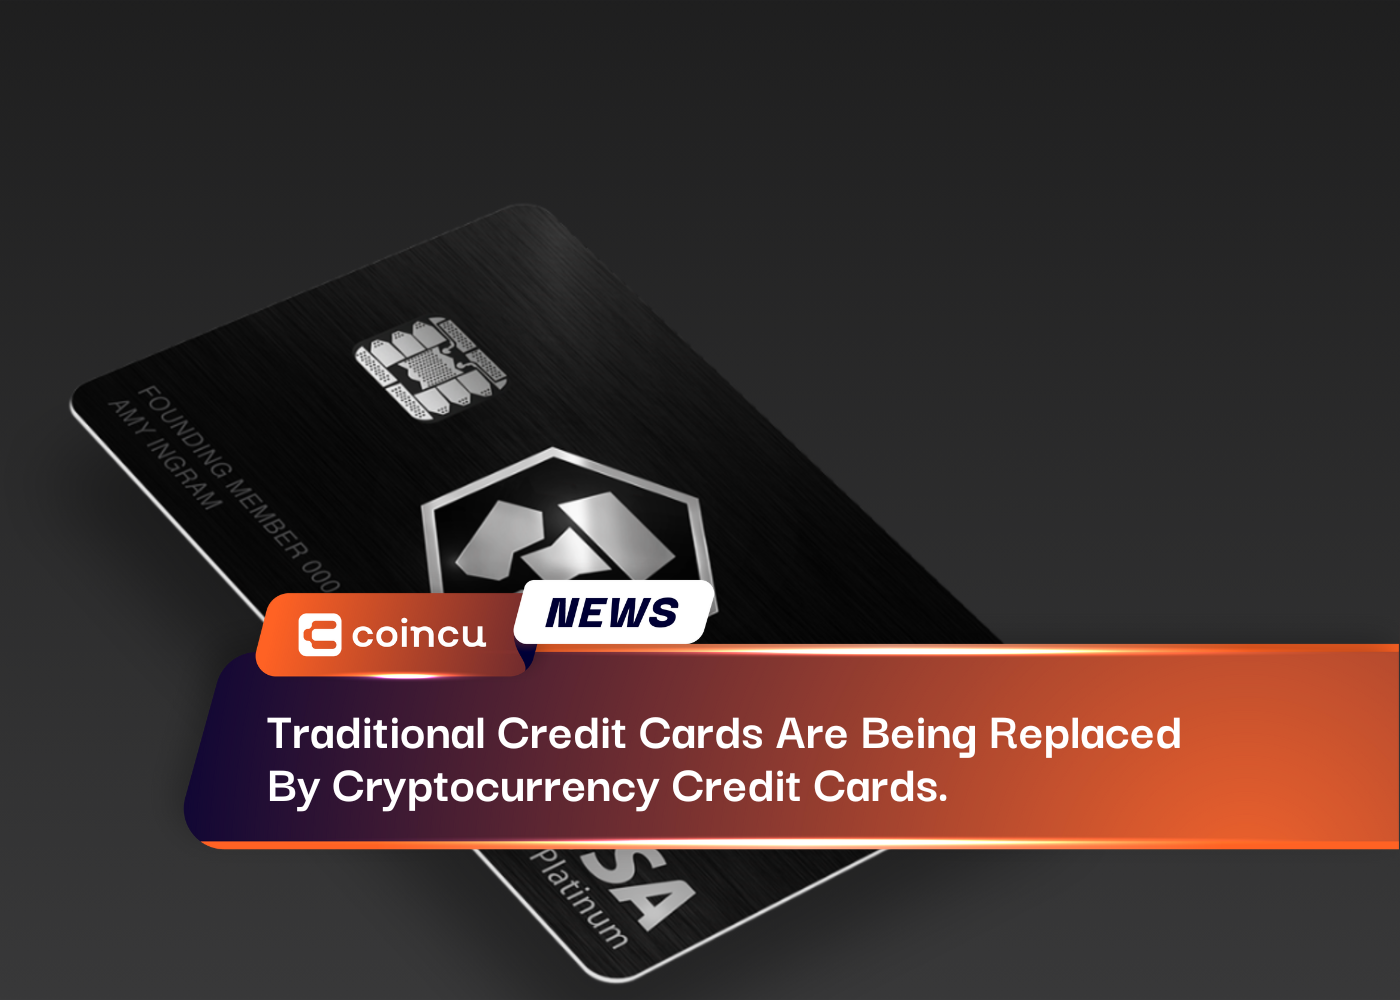 Traditional Credit Cards Are Being Replaced By Cryptocurrency Credit Cards.